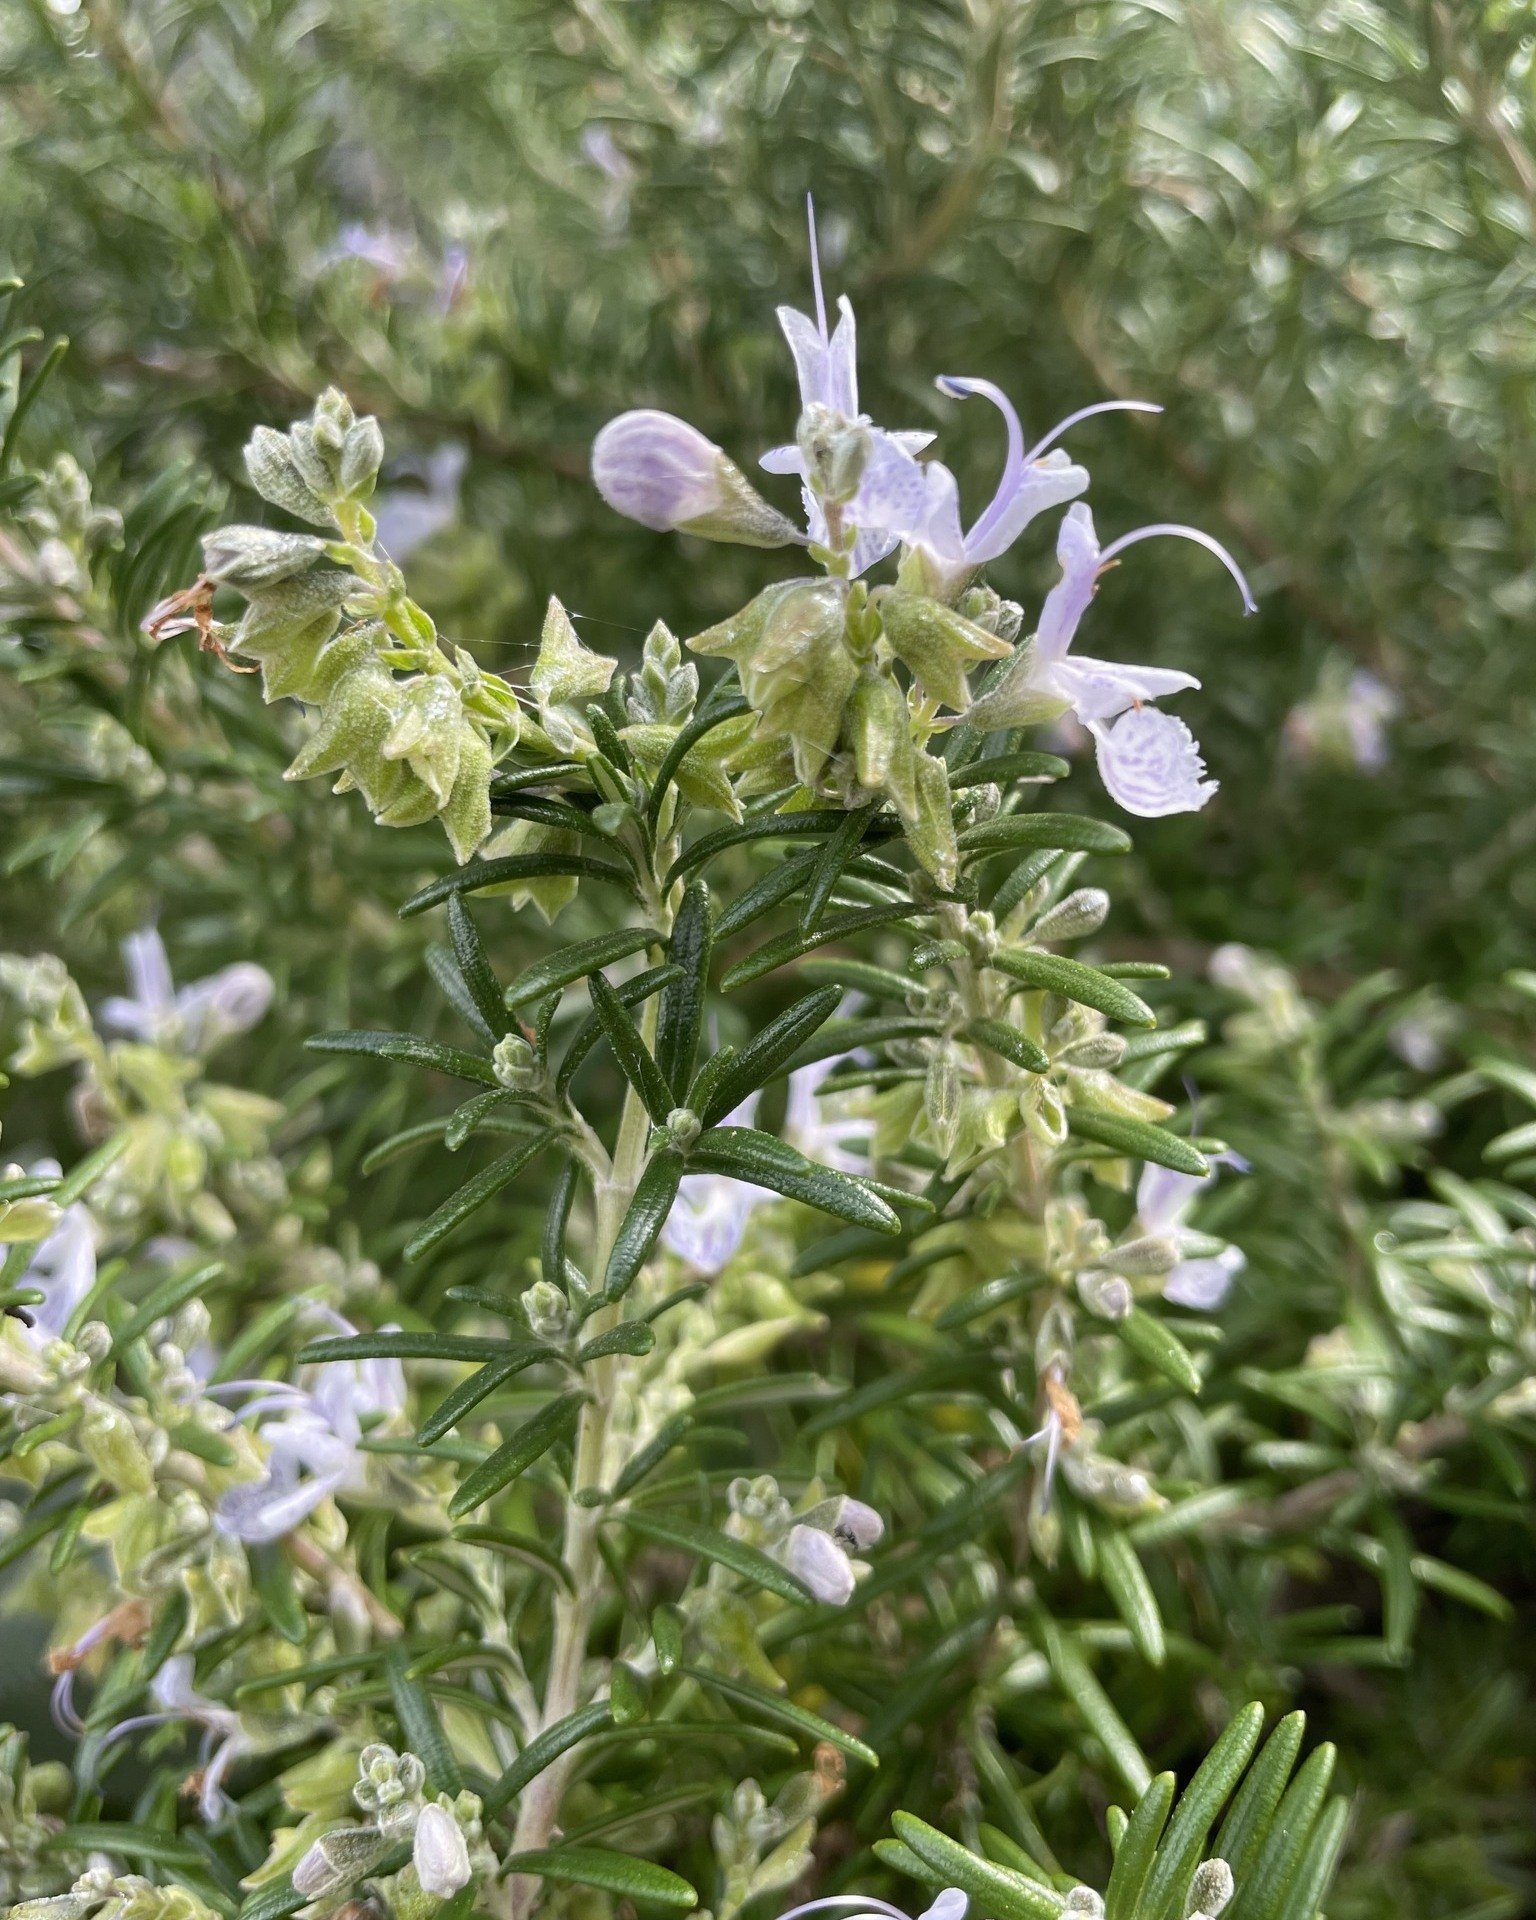 Flora Friday!
To commemorate Anzac Day, we&rsquo;re showcasing the Rosemary (Salvia rosmarinus), an ancient symbol of remembrance.

It&rsquo;s native to the dry, rocky areas of the Mediterranean, such as the Gallipoli peninsula where the original Anz